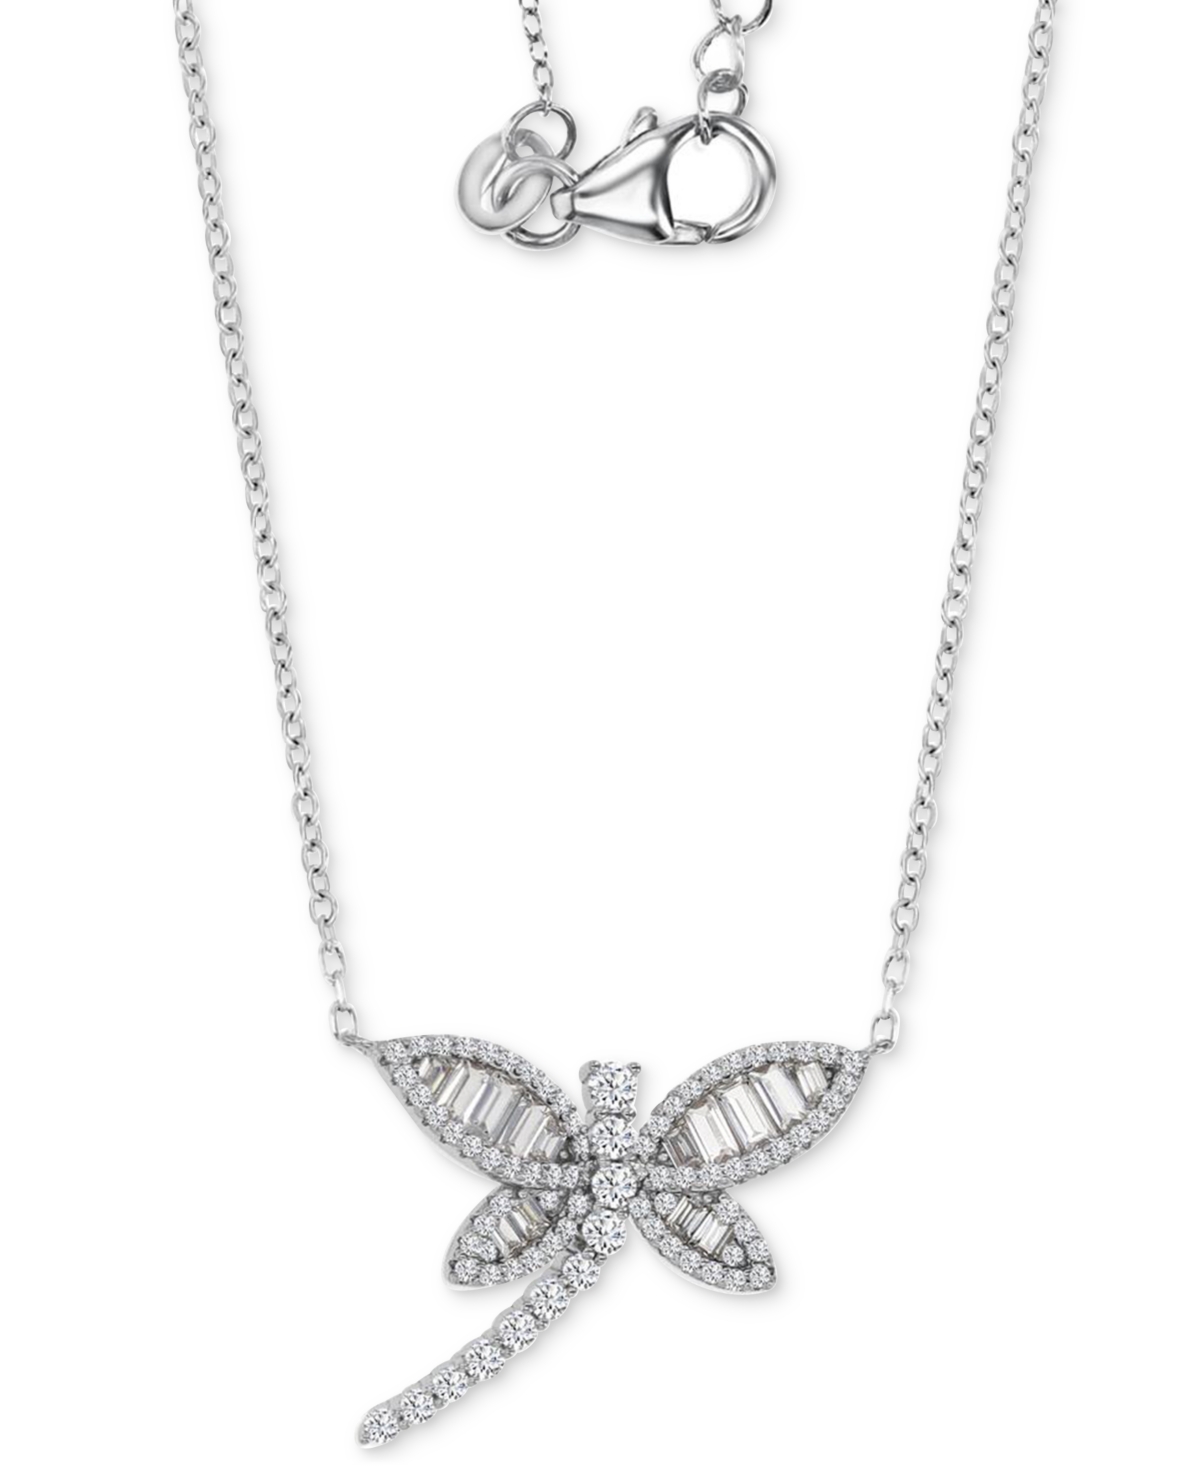 Cubic Zirconia Baguette & Round Dragonfly Pendant Necklace in Sterling Silver, 18" + 2" extender - Silver